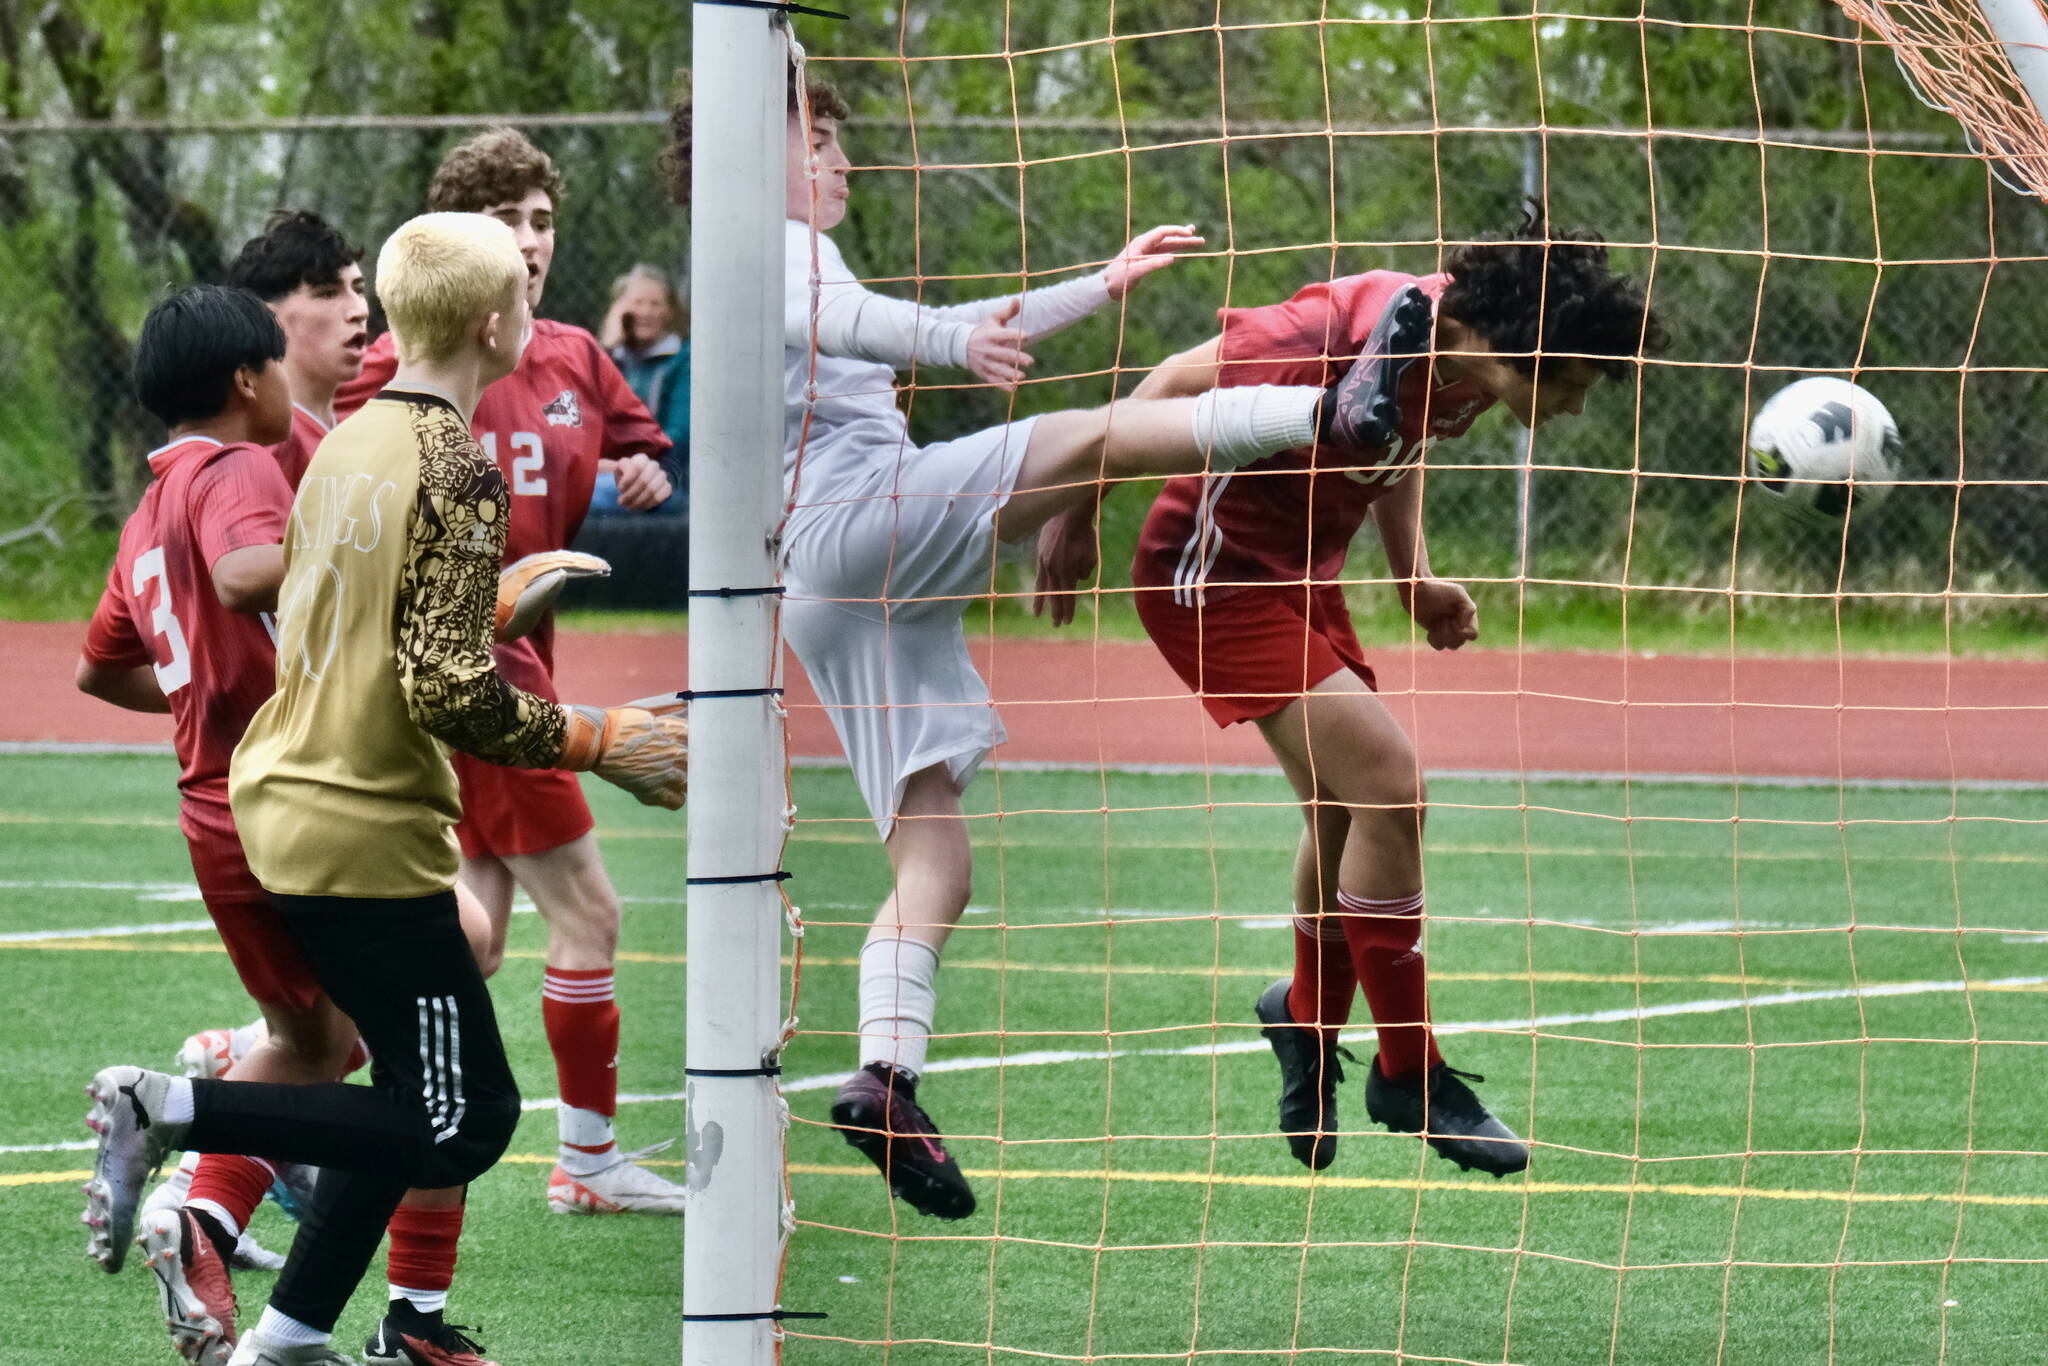 Juneau-Douglas High School: Yadaa.at Kalé senior Sonny Monsef (30) heads in a goal against Ketchikan during the Crimson Bears 2-0 title clinching win over the Kings at Adair-Kennedy Field on Saturday. (Klas Stolpe / For the Juneau Empire)